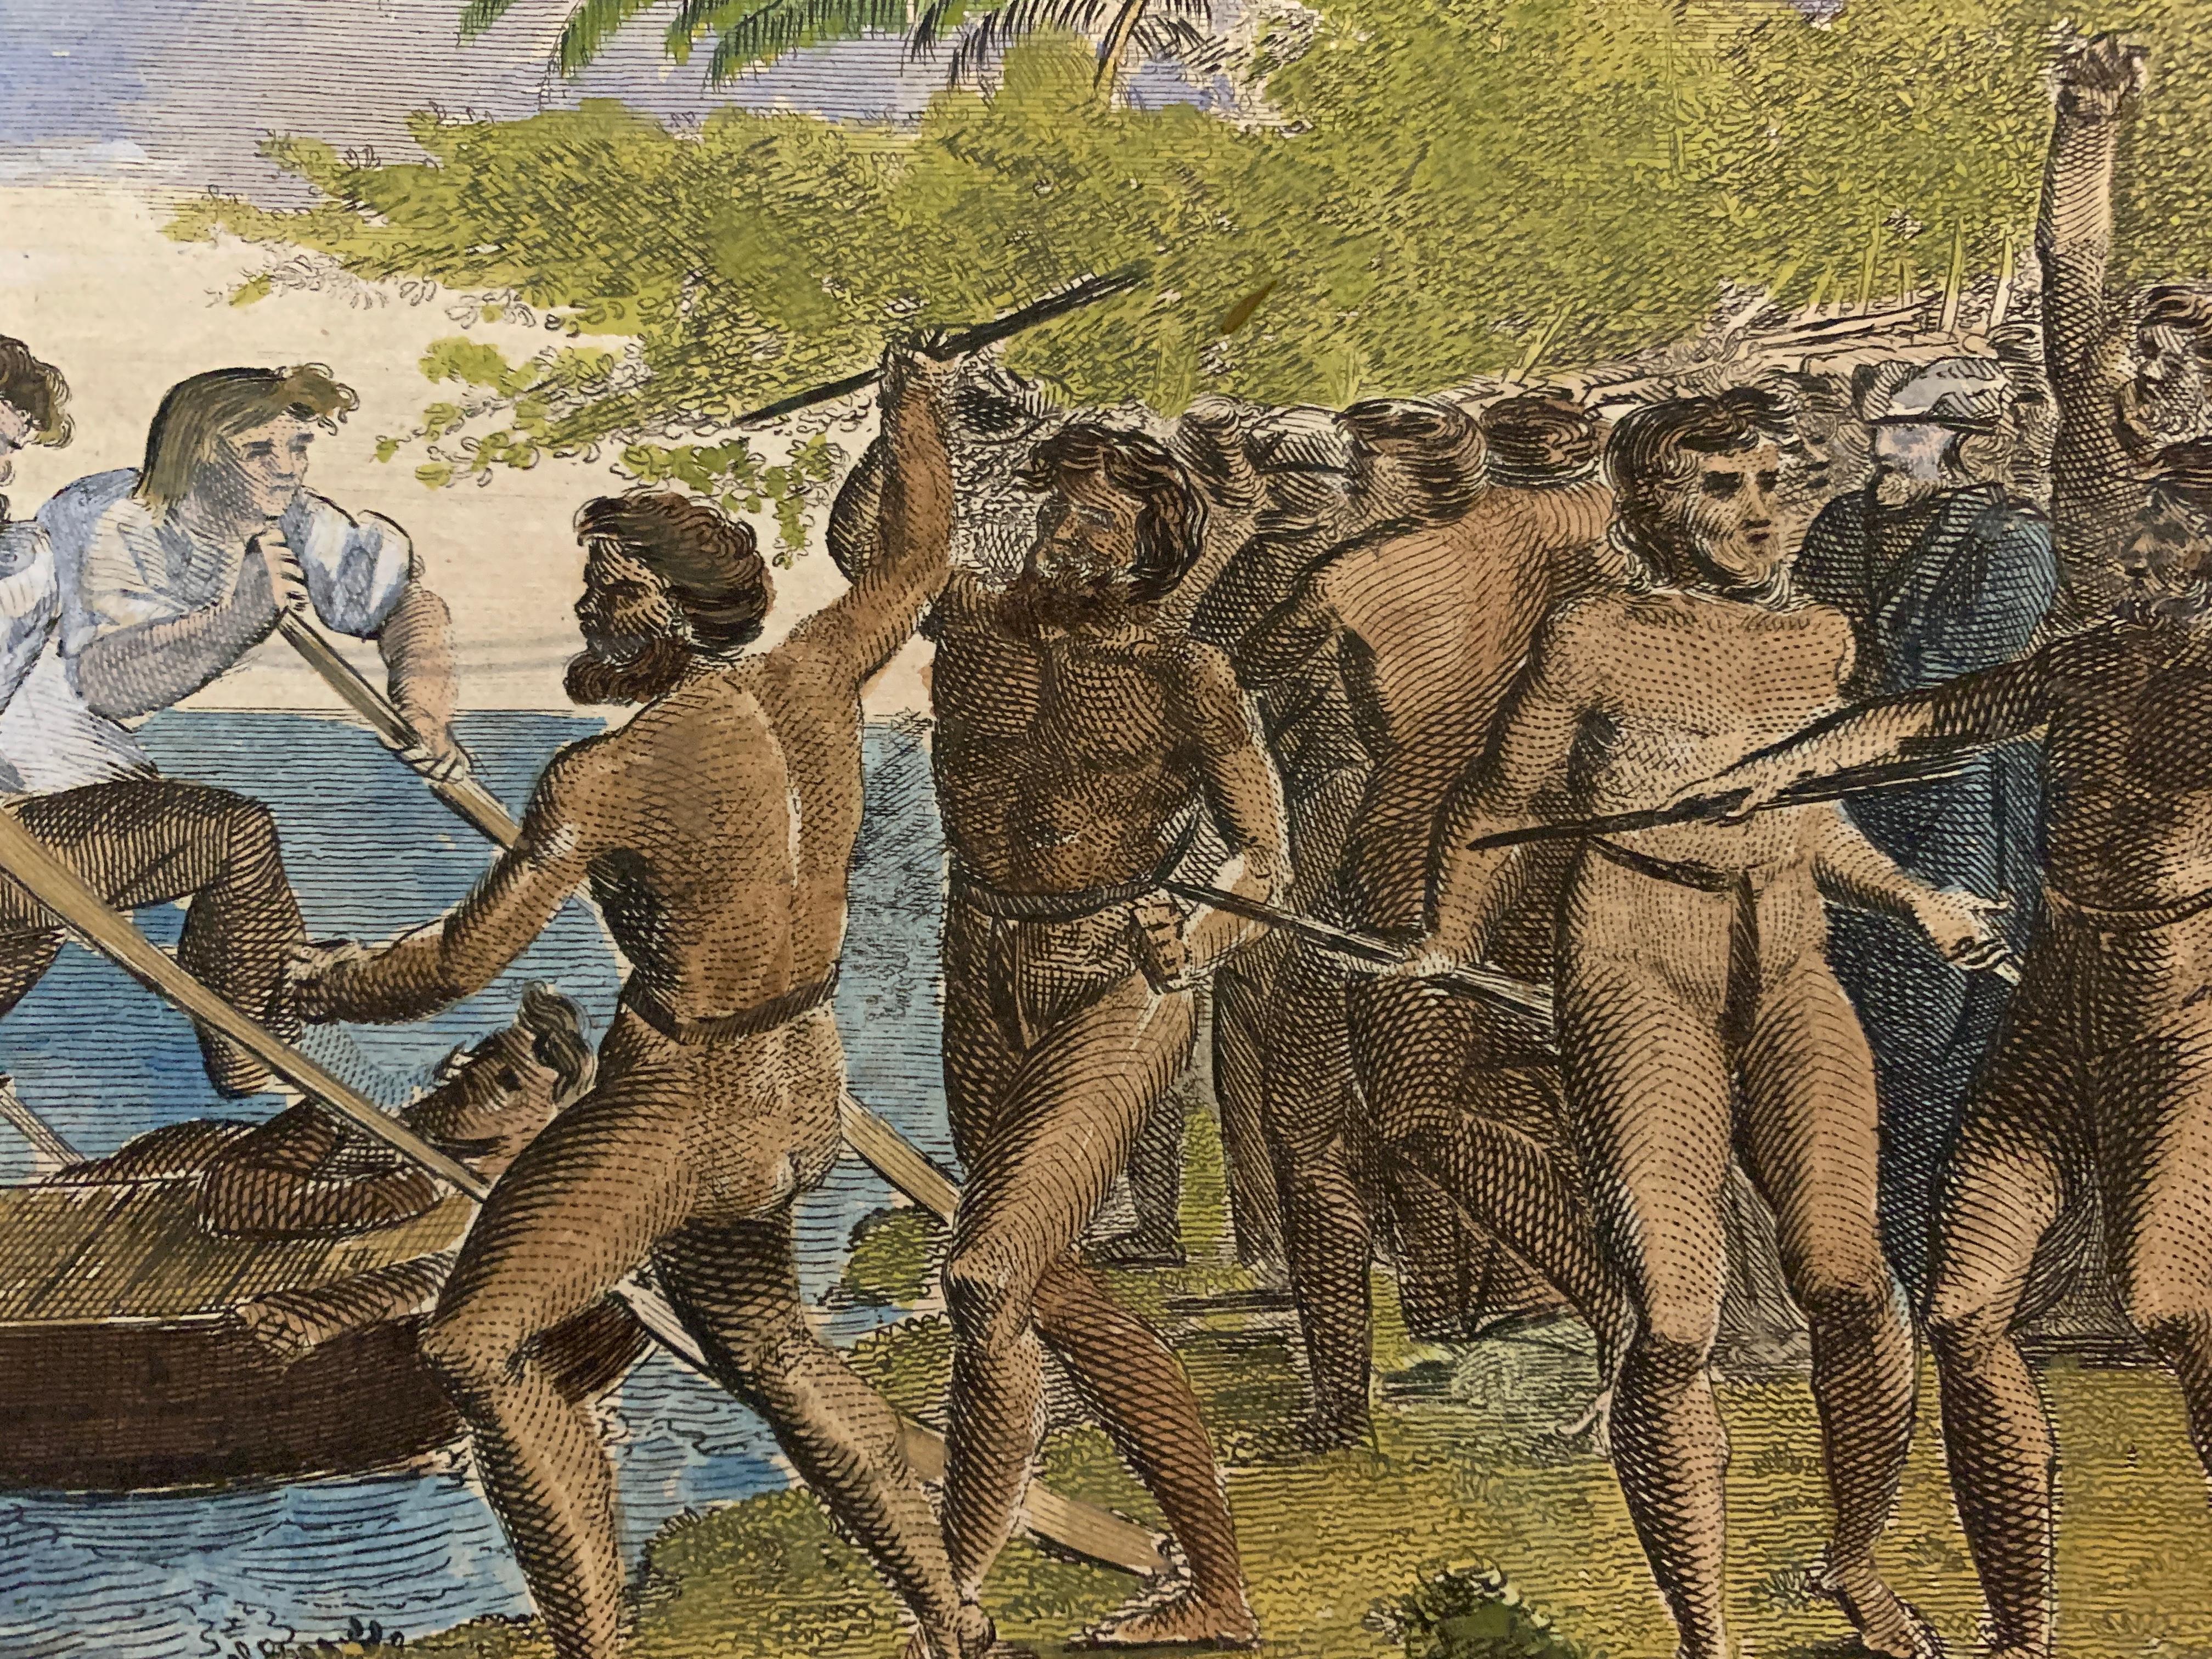 Very Interesting pair of hand-colored engravings of Captain Cook landing in Mallicolo and Erramanga, New Hebrides.
Possibly taken from a book these are of great historical interest. 

The hand-coloring is later possibly from the 19th century. This